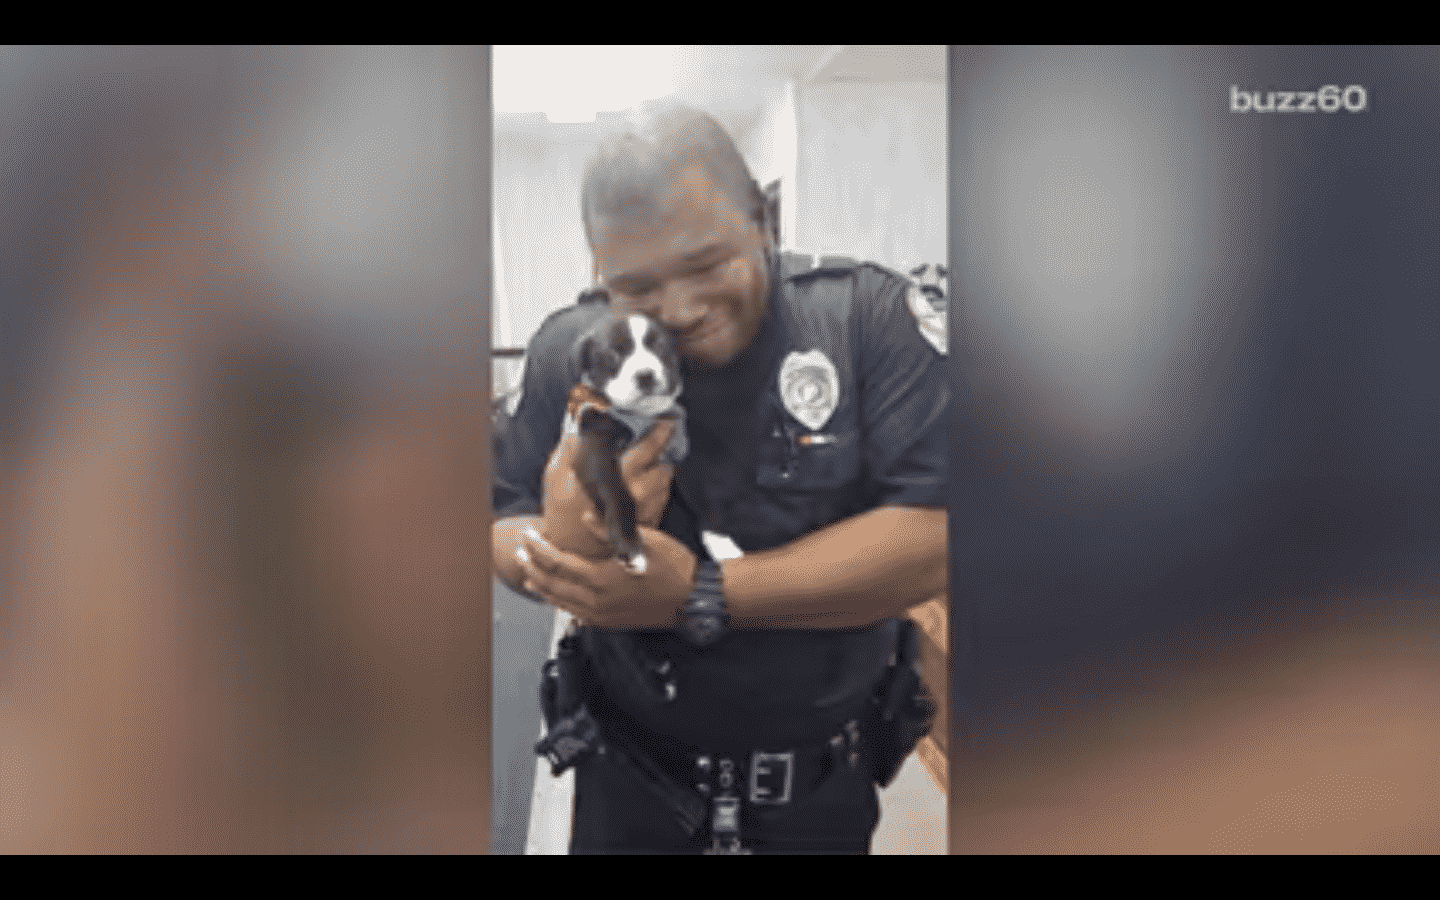 officer holding a small puppy